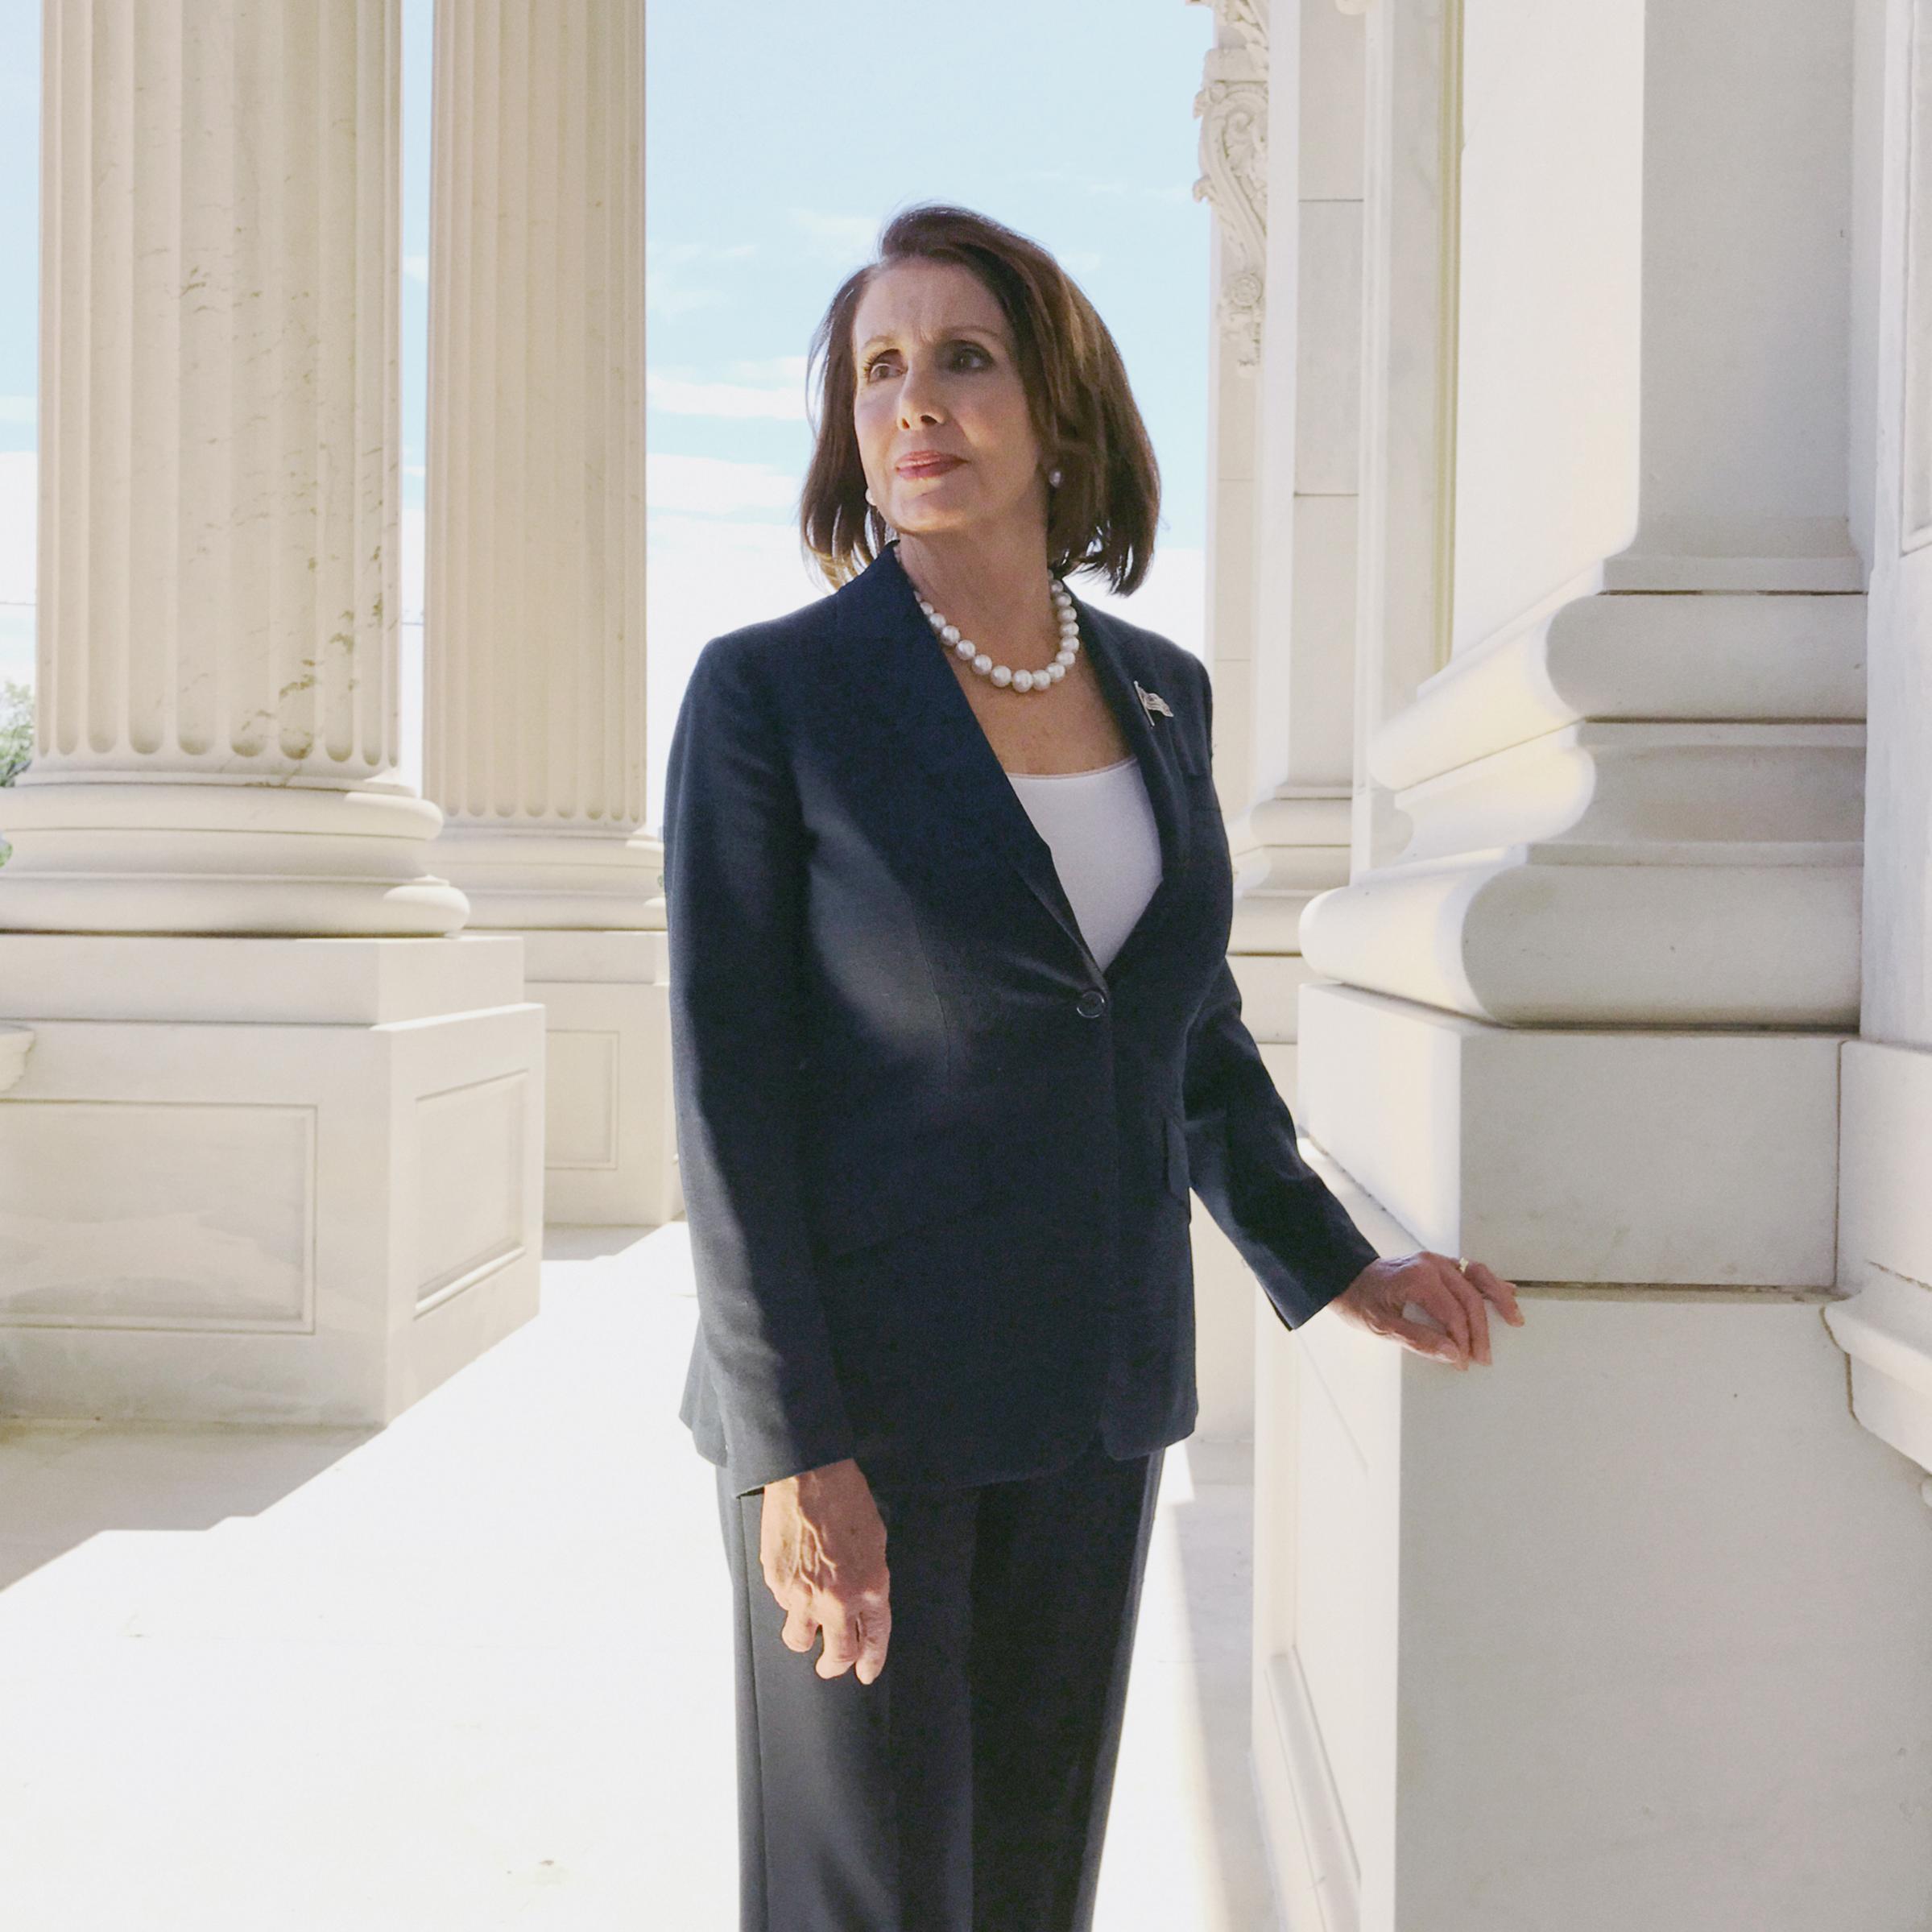 Portrait of Democratic Leader Nancy Pelosi, photographed at The Capitol in Washington, DC, Sept. 22, 2016.